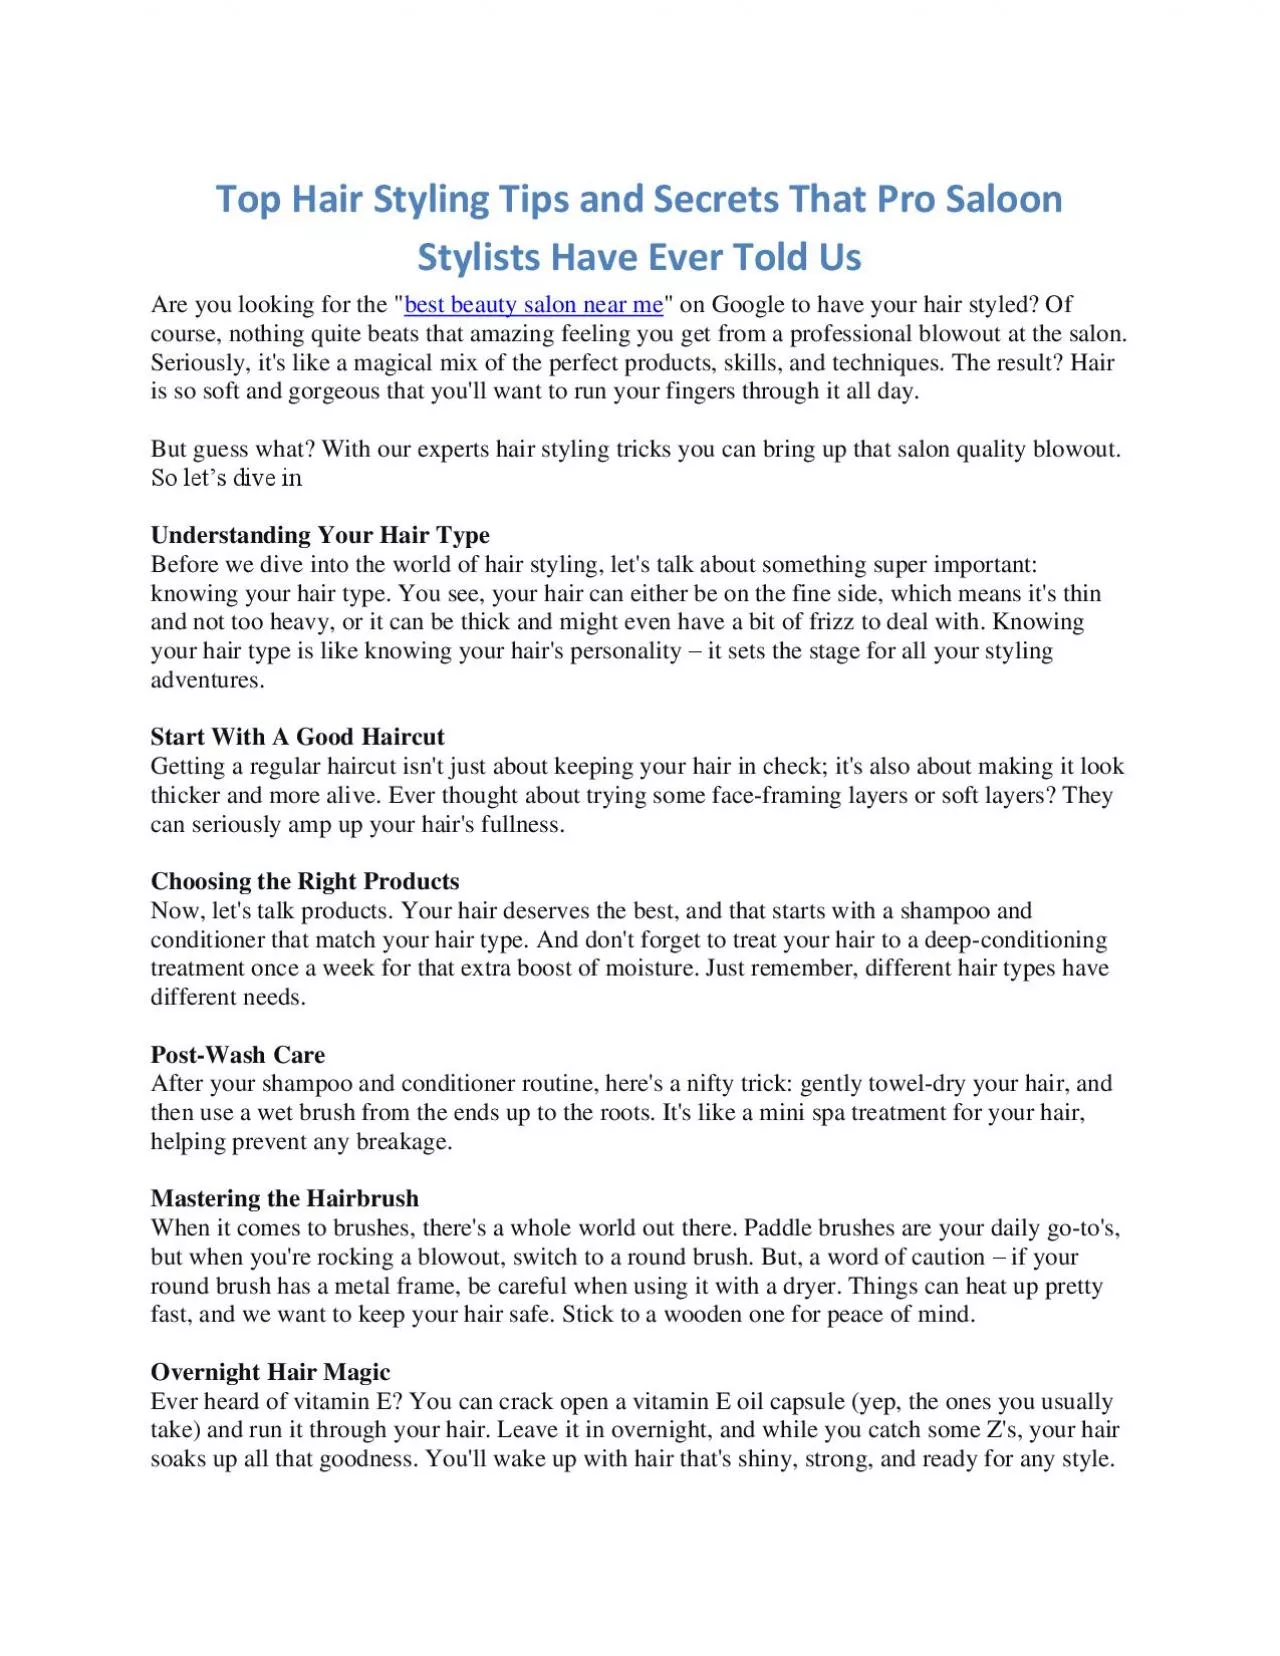 Top Hair Styling Tips and Secrets That Pro Saloon Stylists Have Ever Told Us